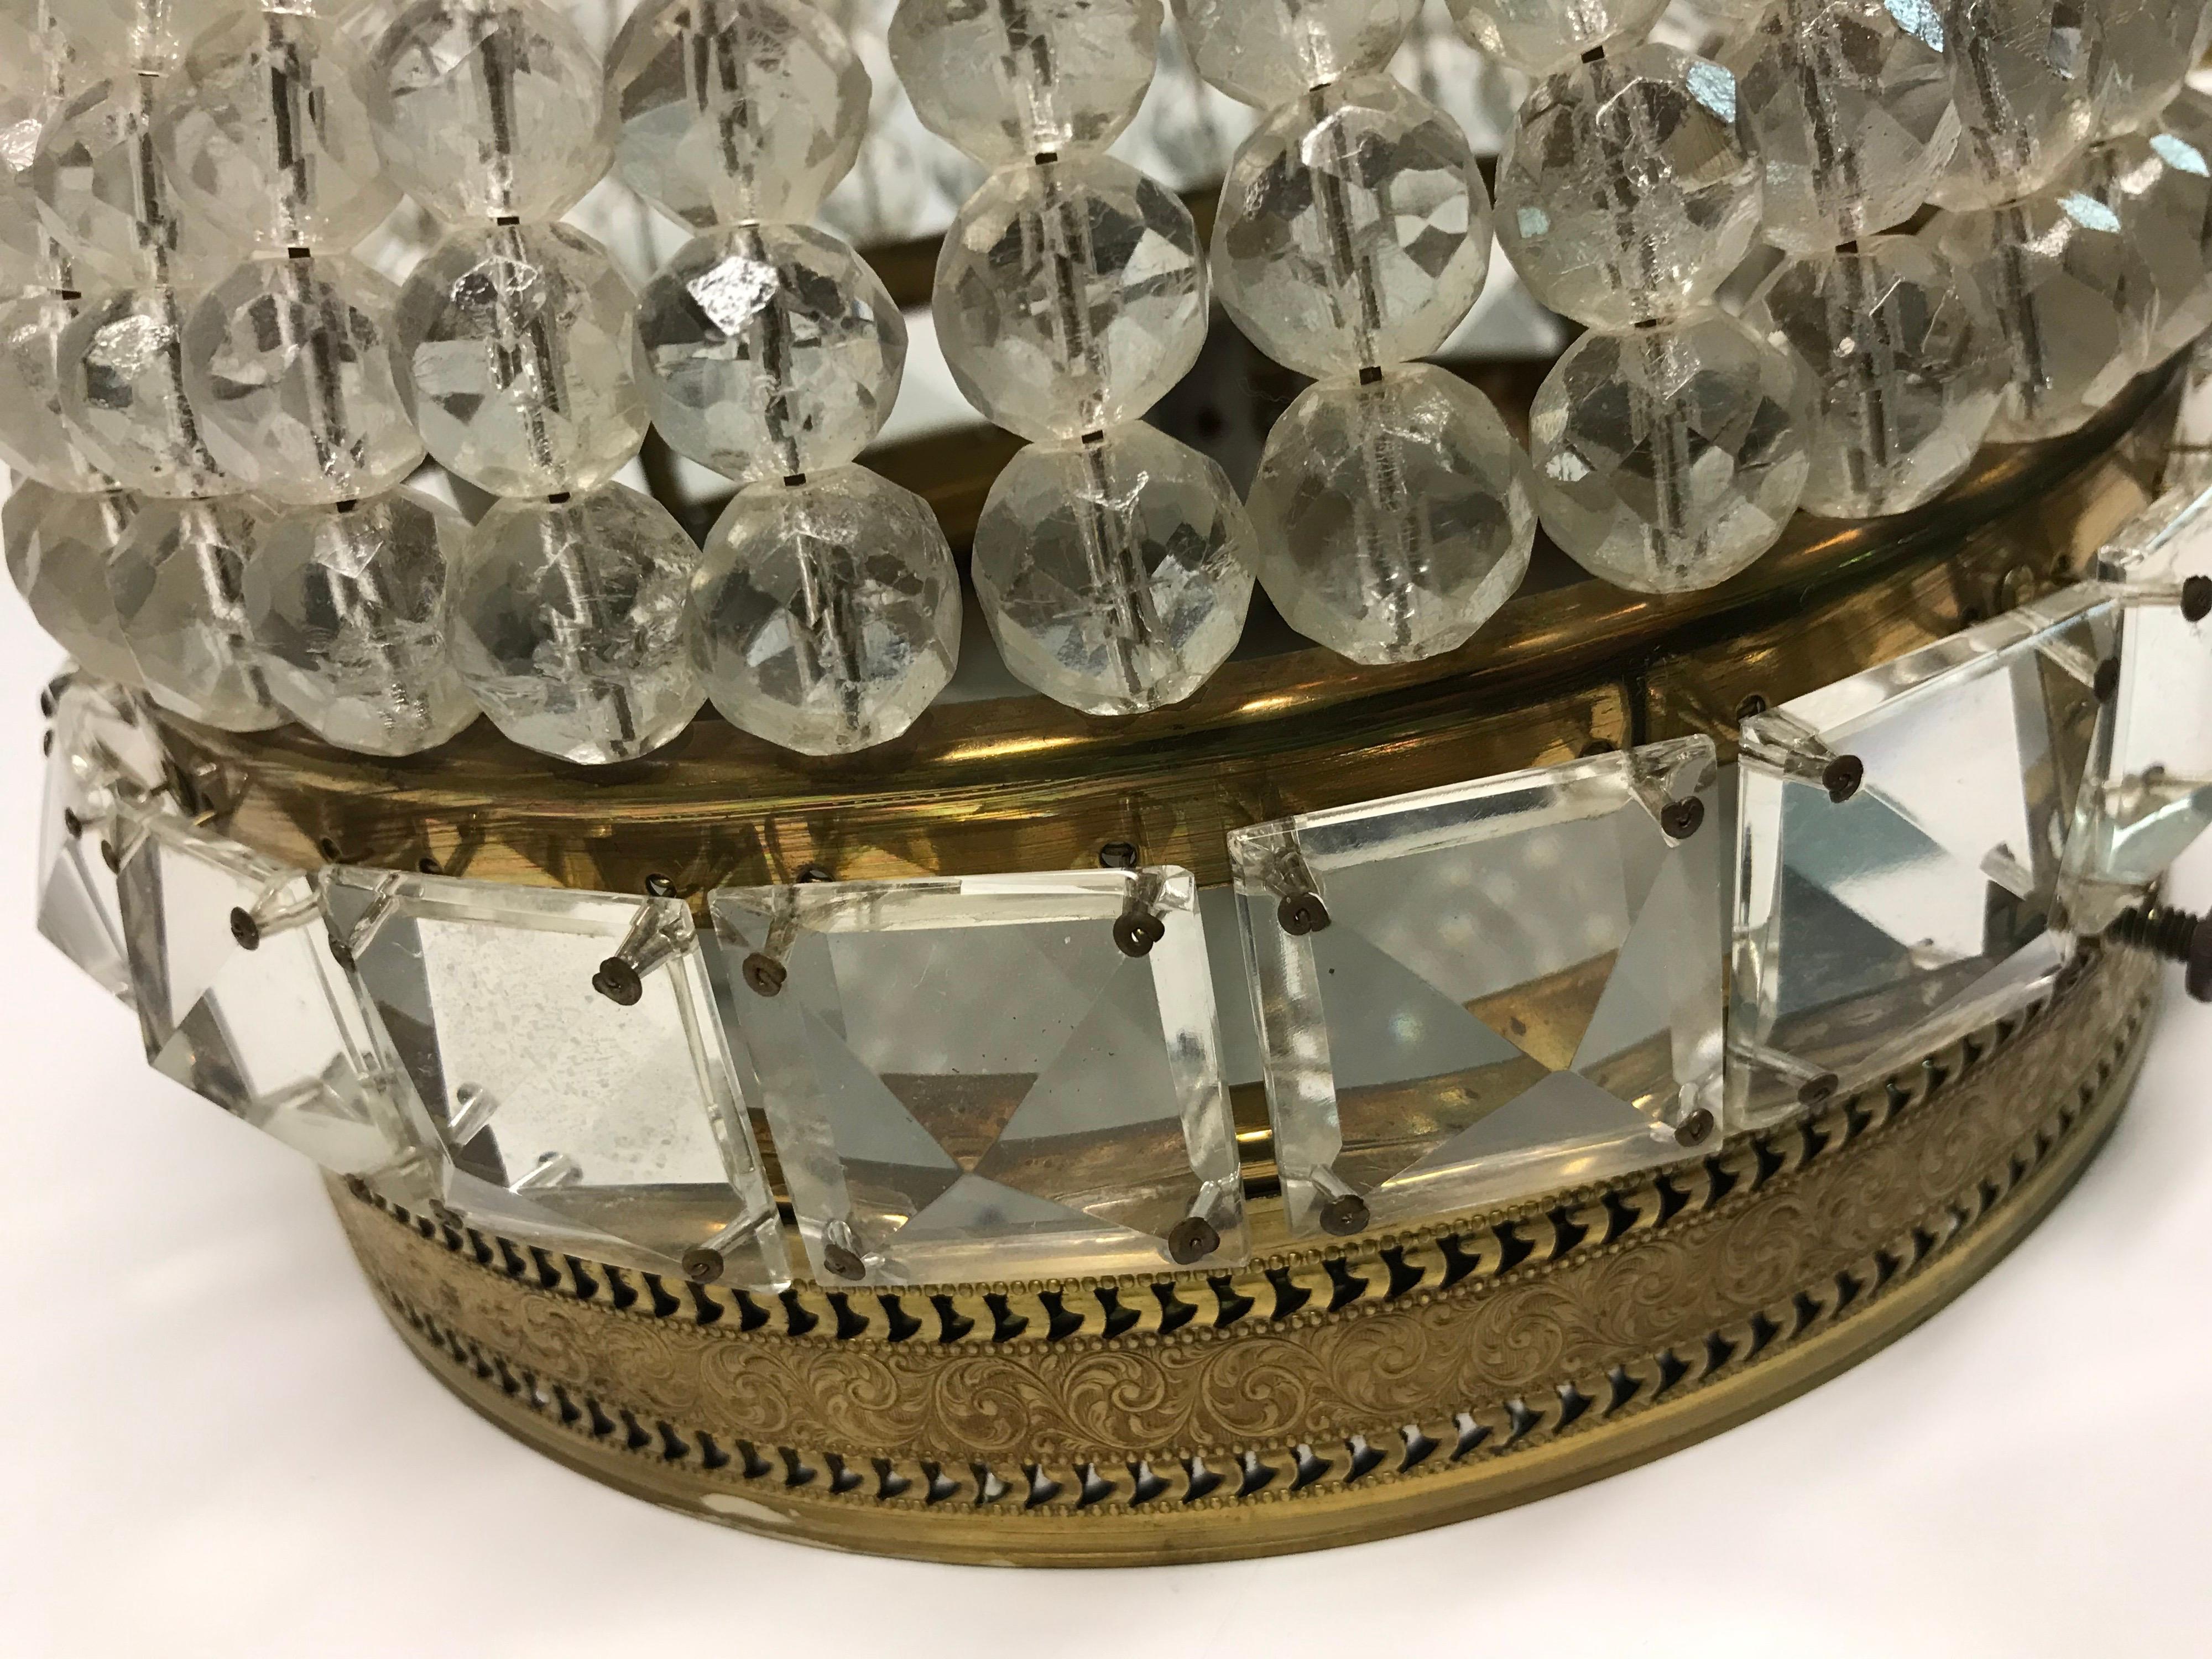 This is a pair of round crystal vintage flush mount coordinating fixtures They are probably from the 1950s-1960s and have original wiring the banding is brass colored pierced metal and the crystals are round beading and square crystals surrounding